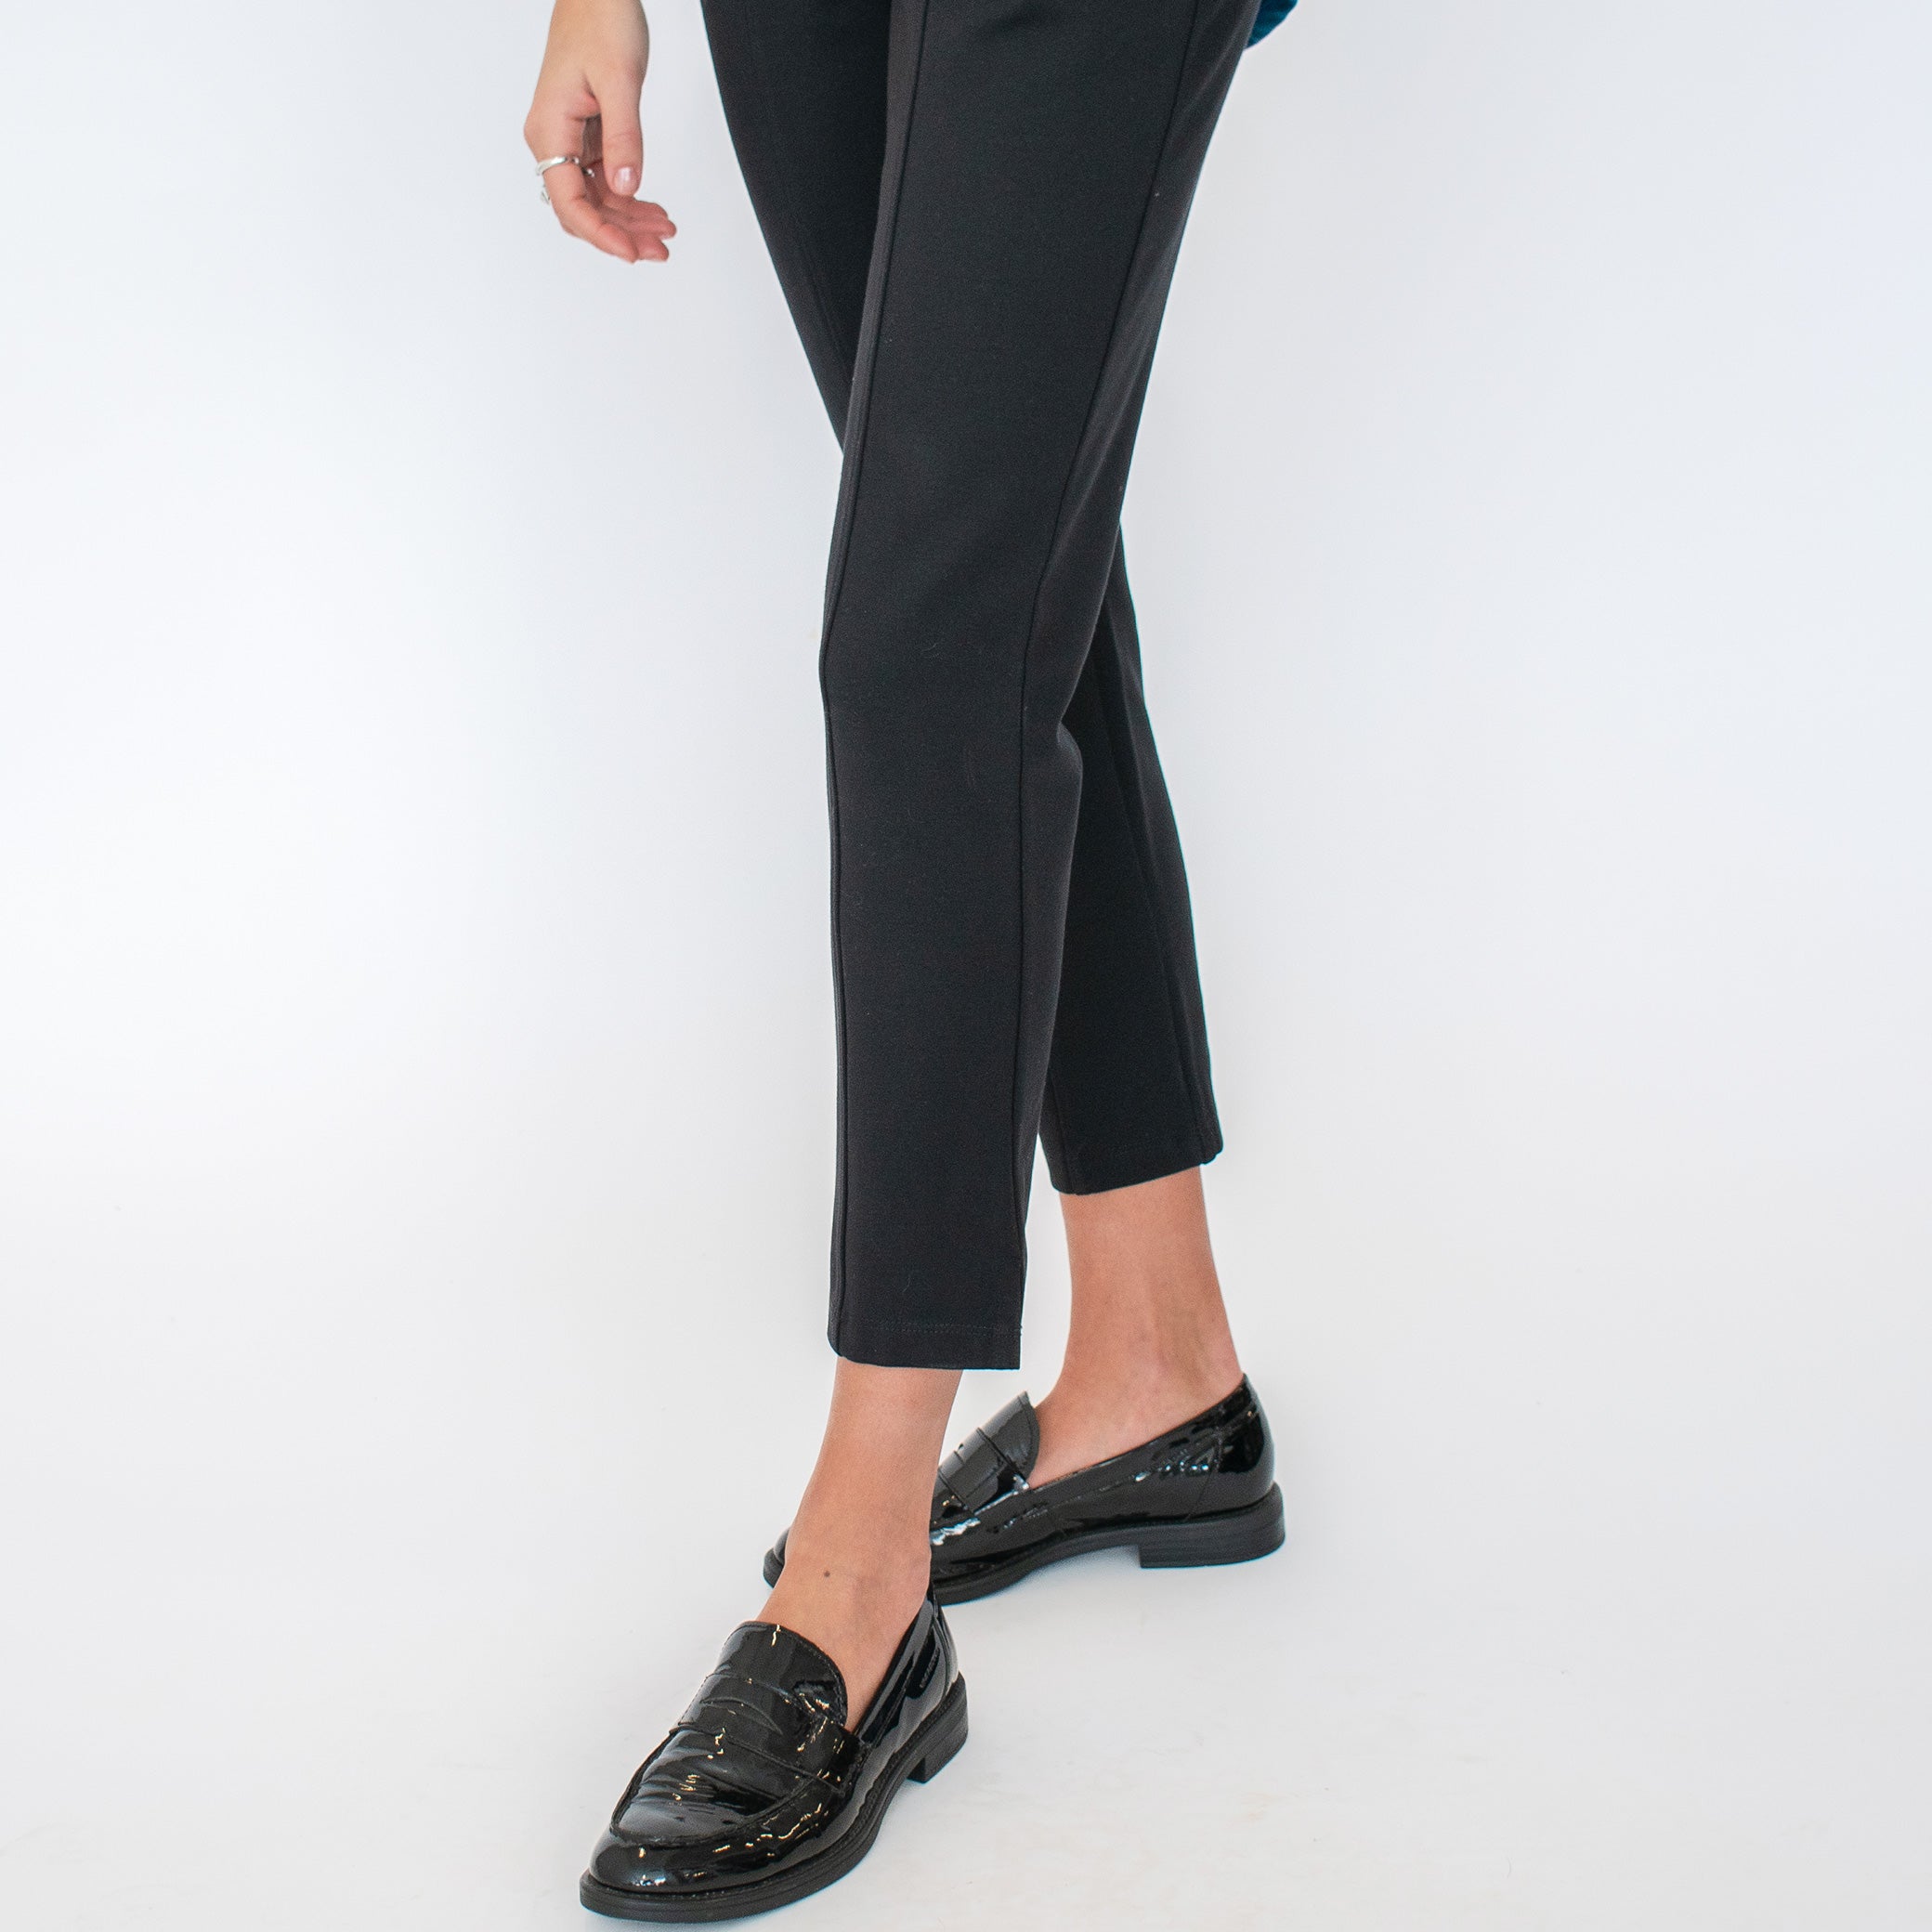 The Tailored Ponte Trouser, Women's Sustainable Wide Leg Pant